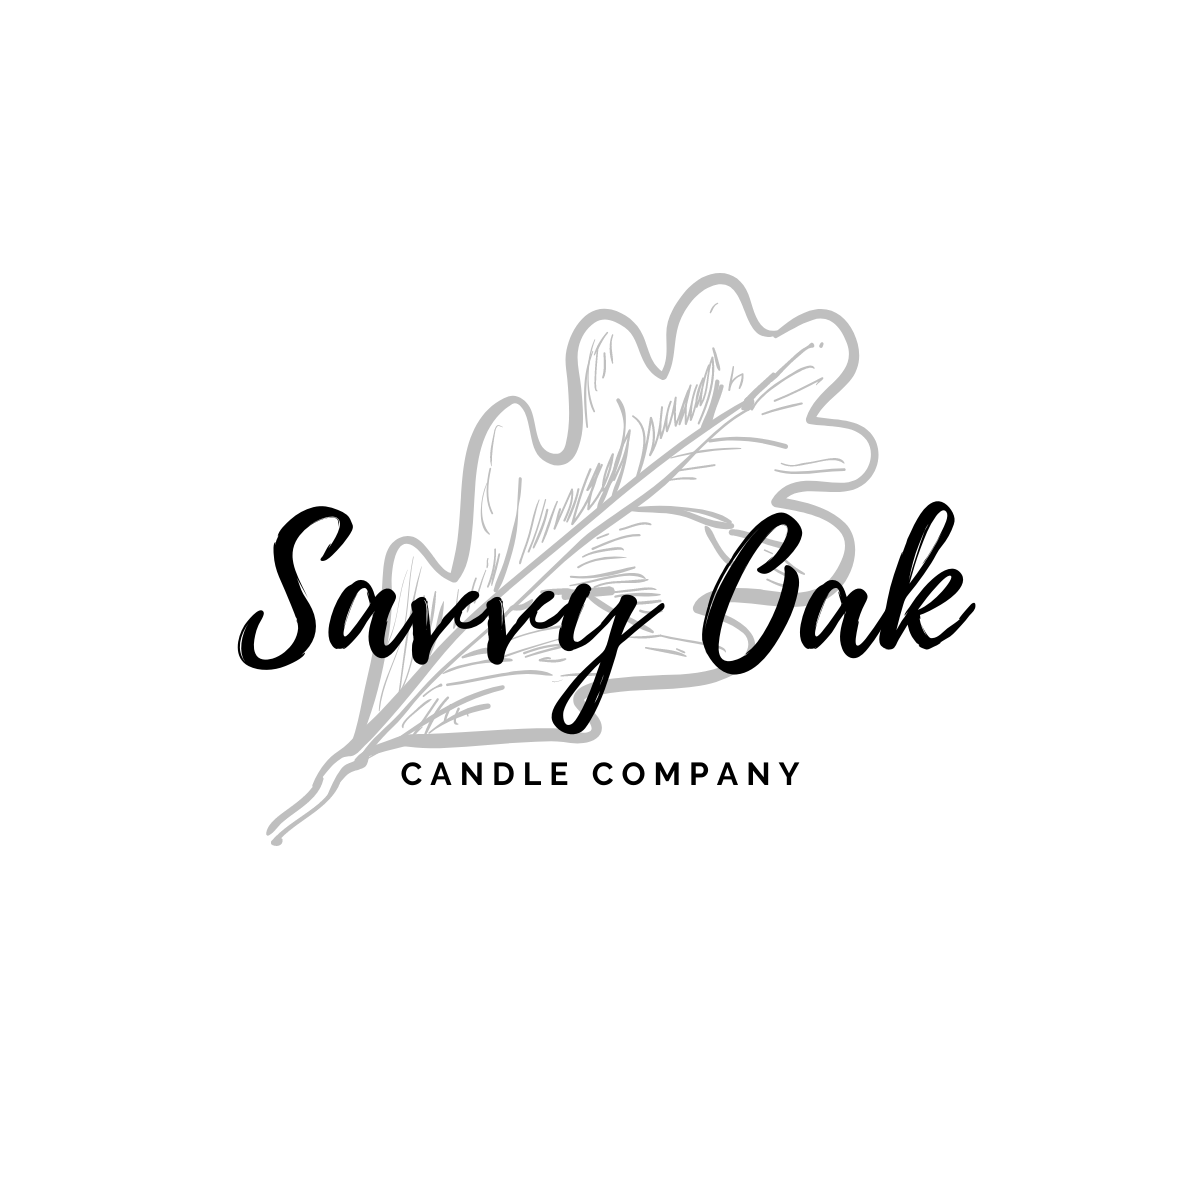 Savvy Oak Candle Company Overview